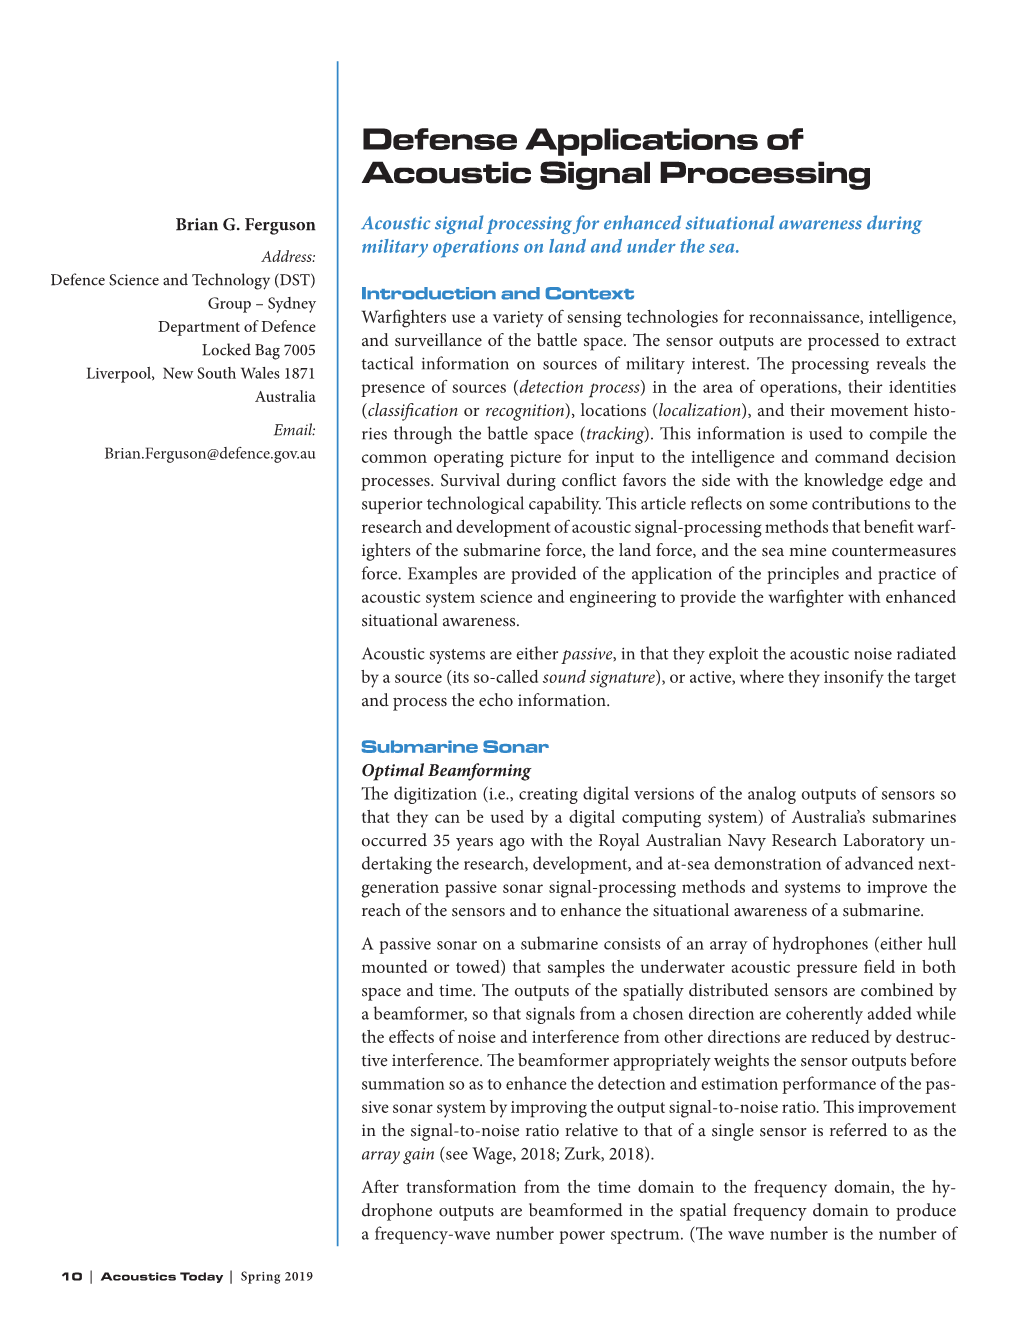 Defense Applications of Acoustic Signal Processing